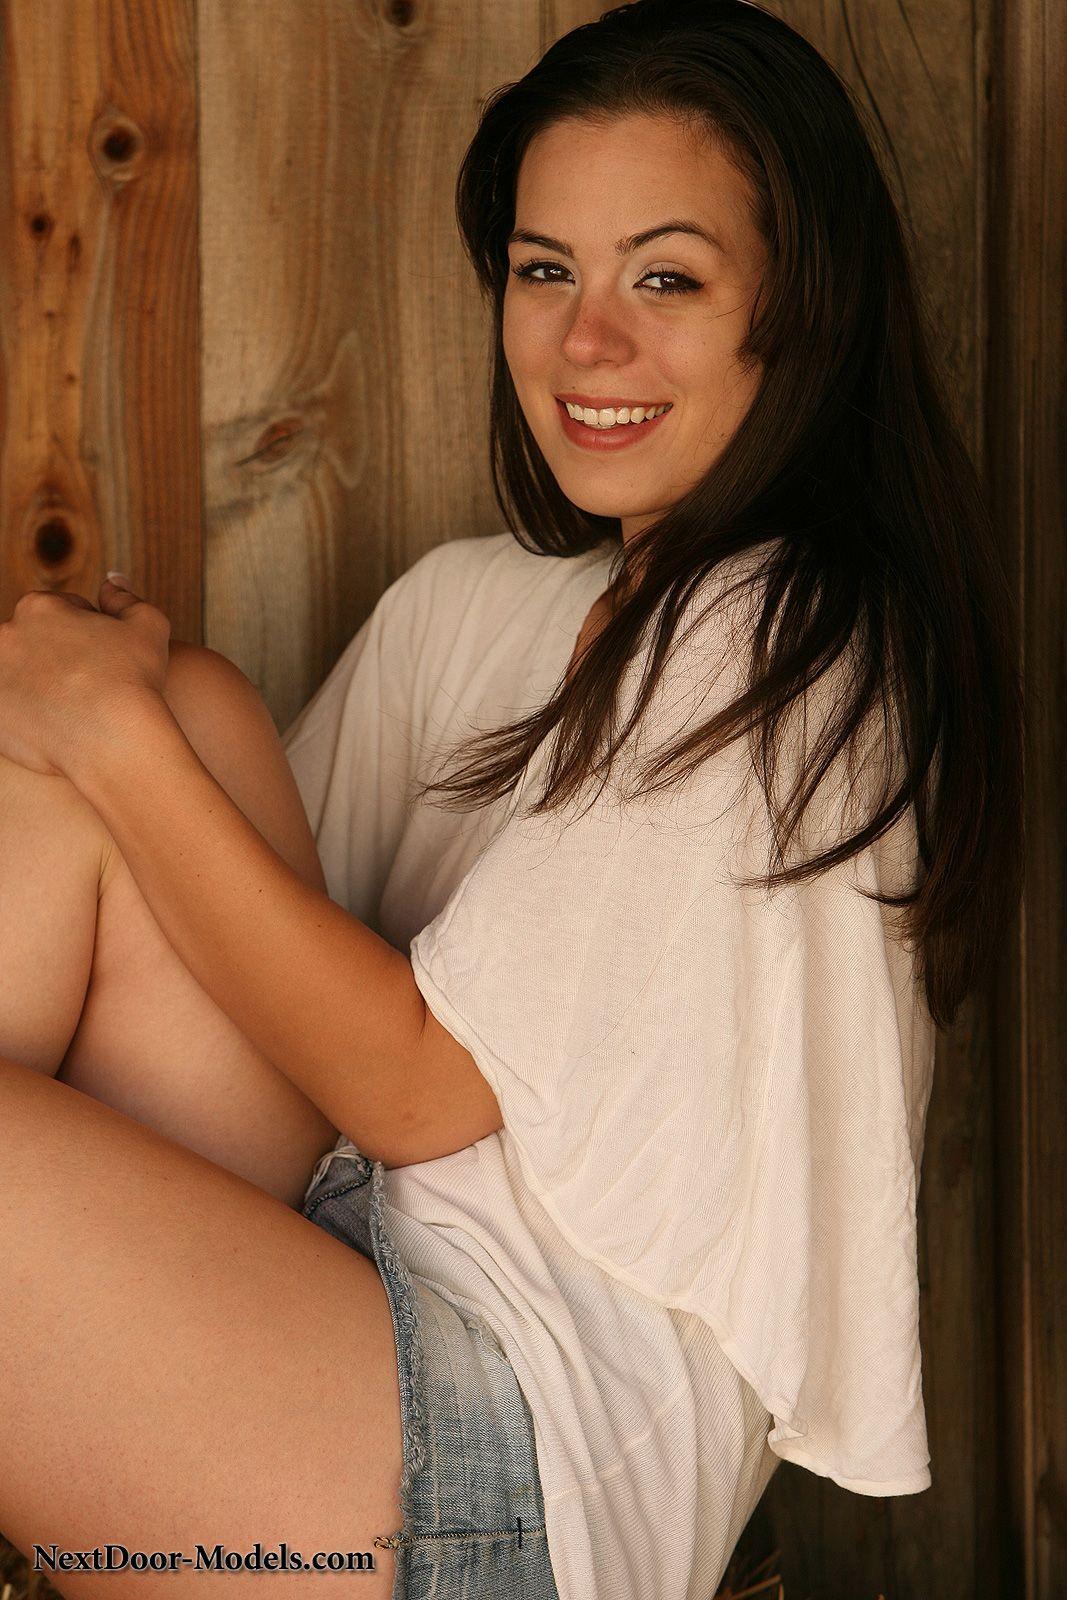 Pictures of the farmer's daughter hot for you in the barn #60676456